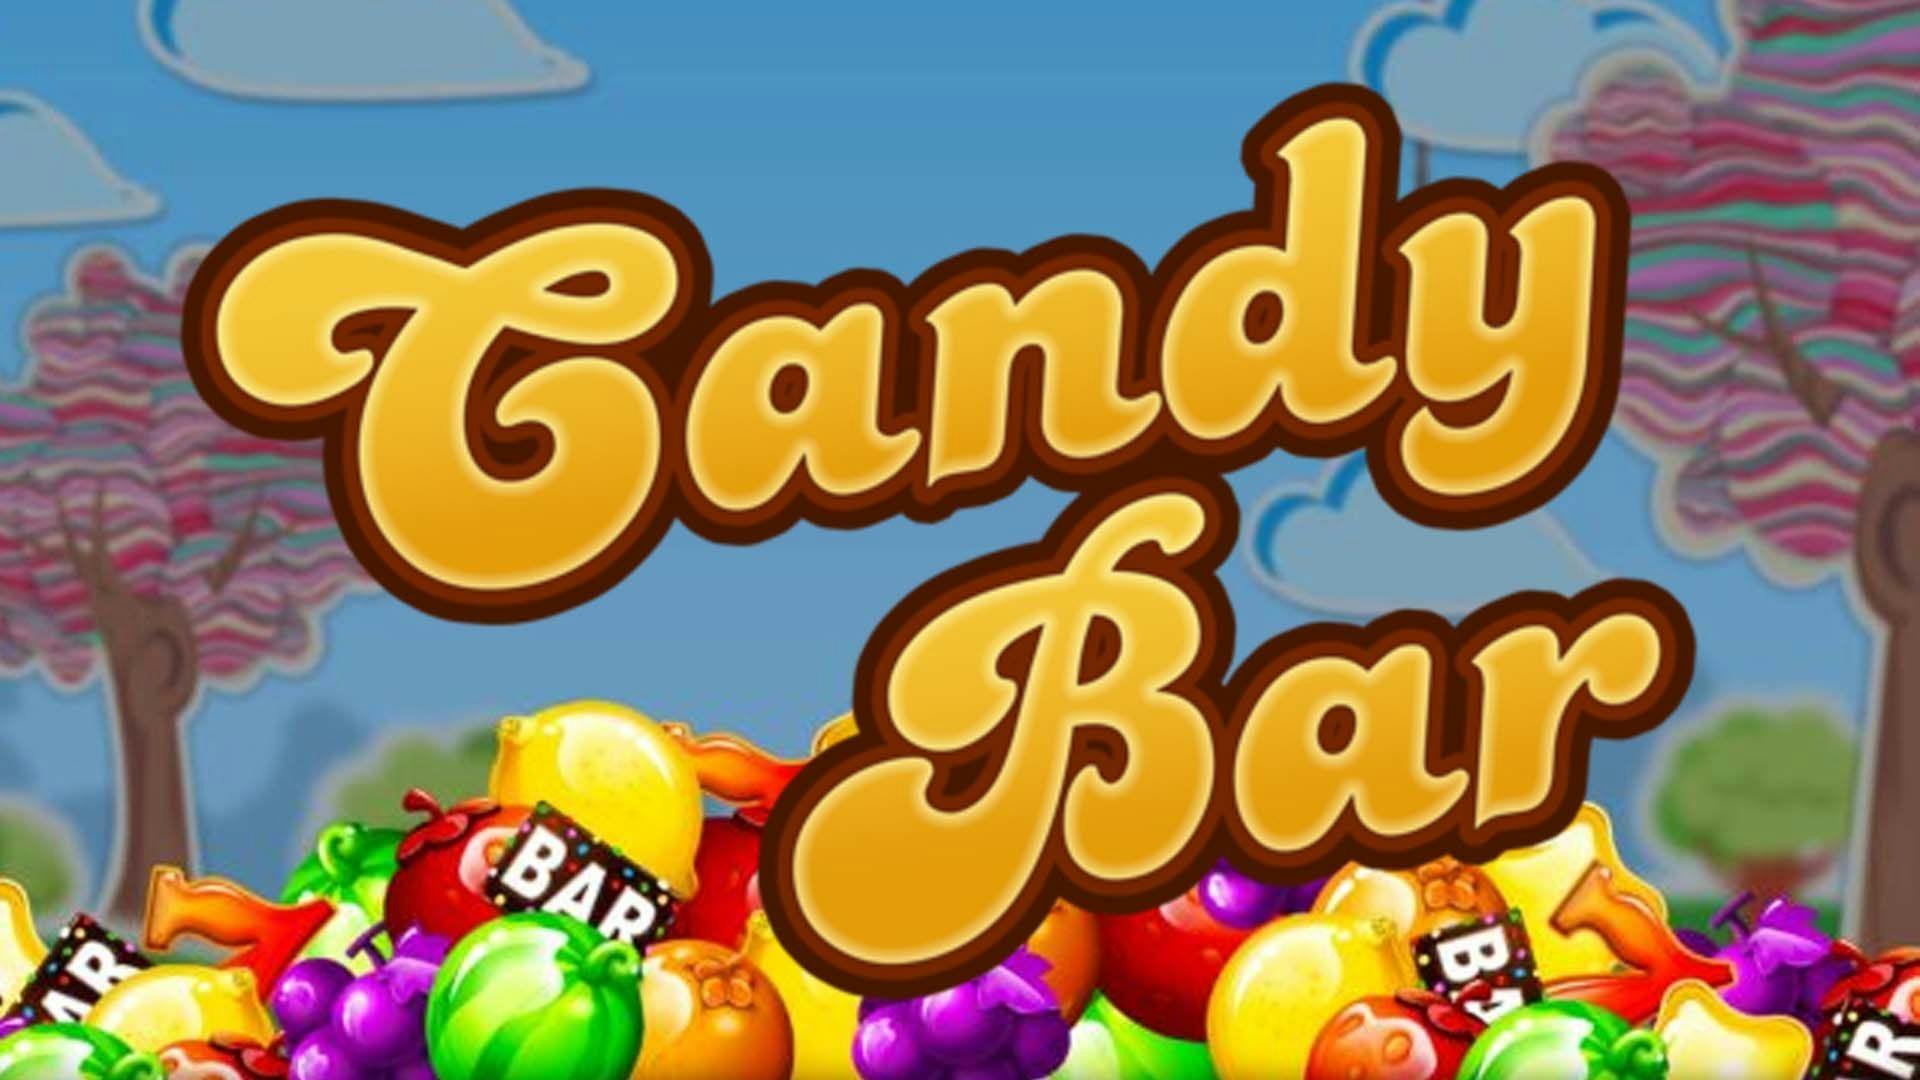 Candy Bar Slot Machine Online Free Game Play